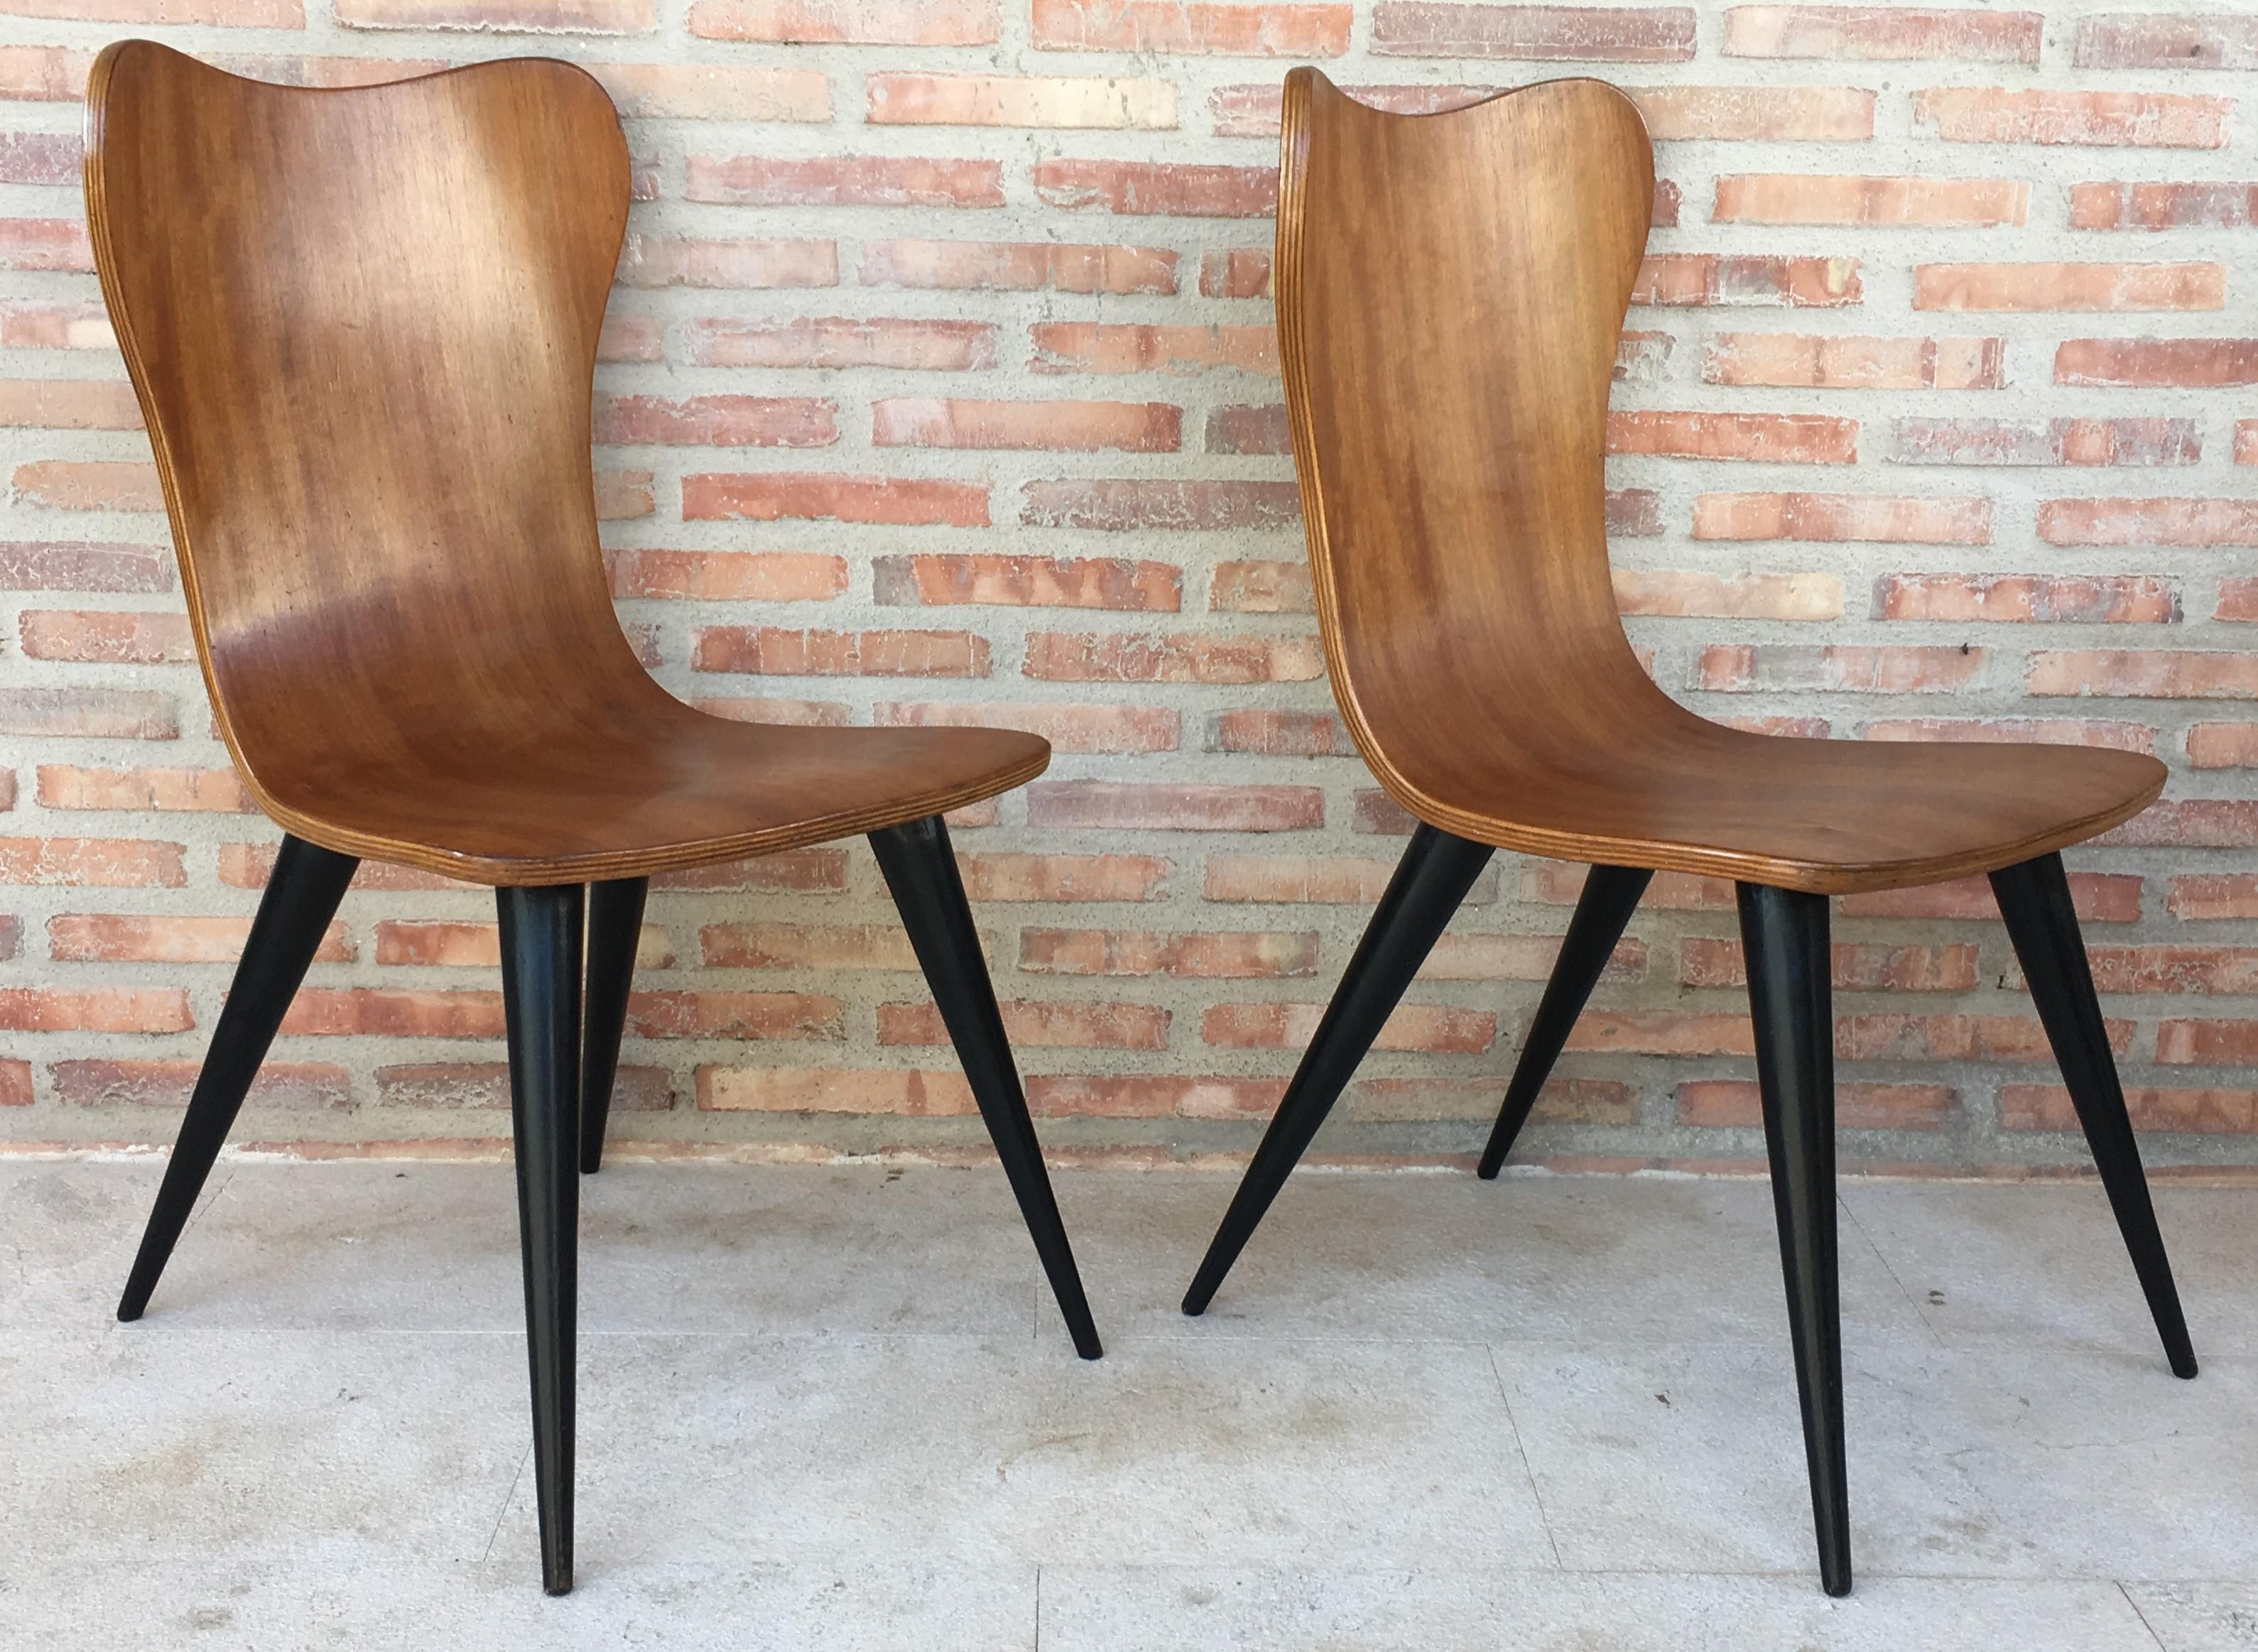 20th Century Pair of Midcentury Arne Jacobsen Style Chairs with Black Tapered Legs For Sale